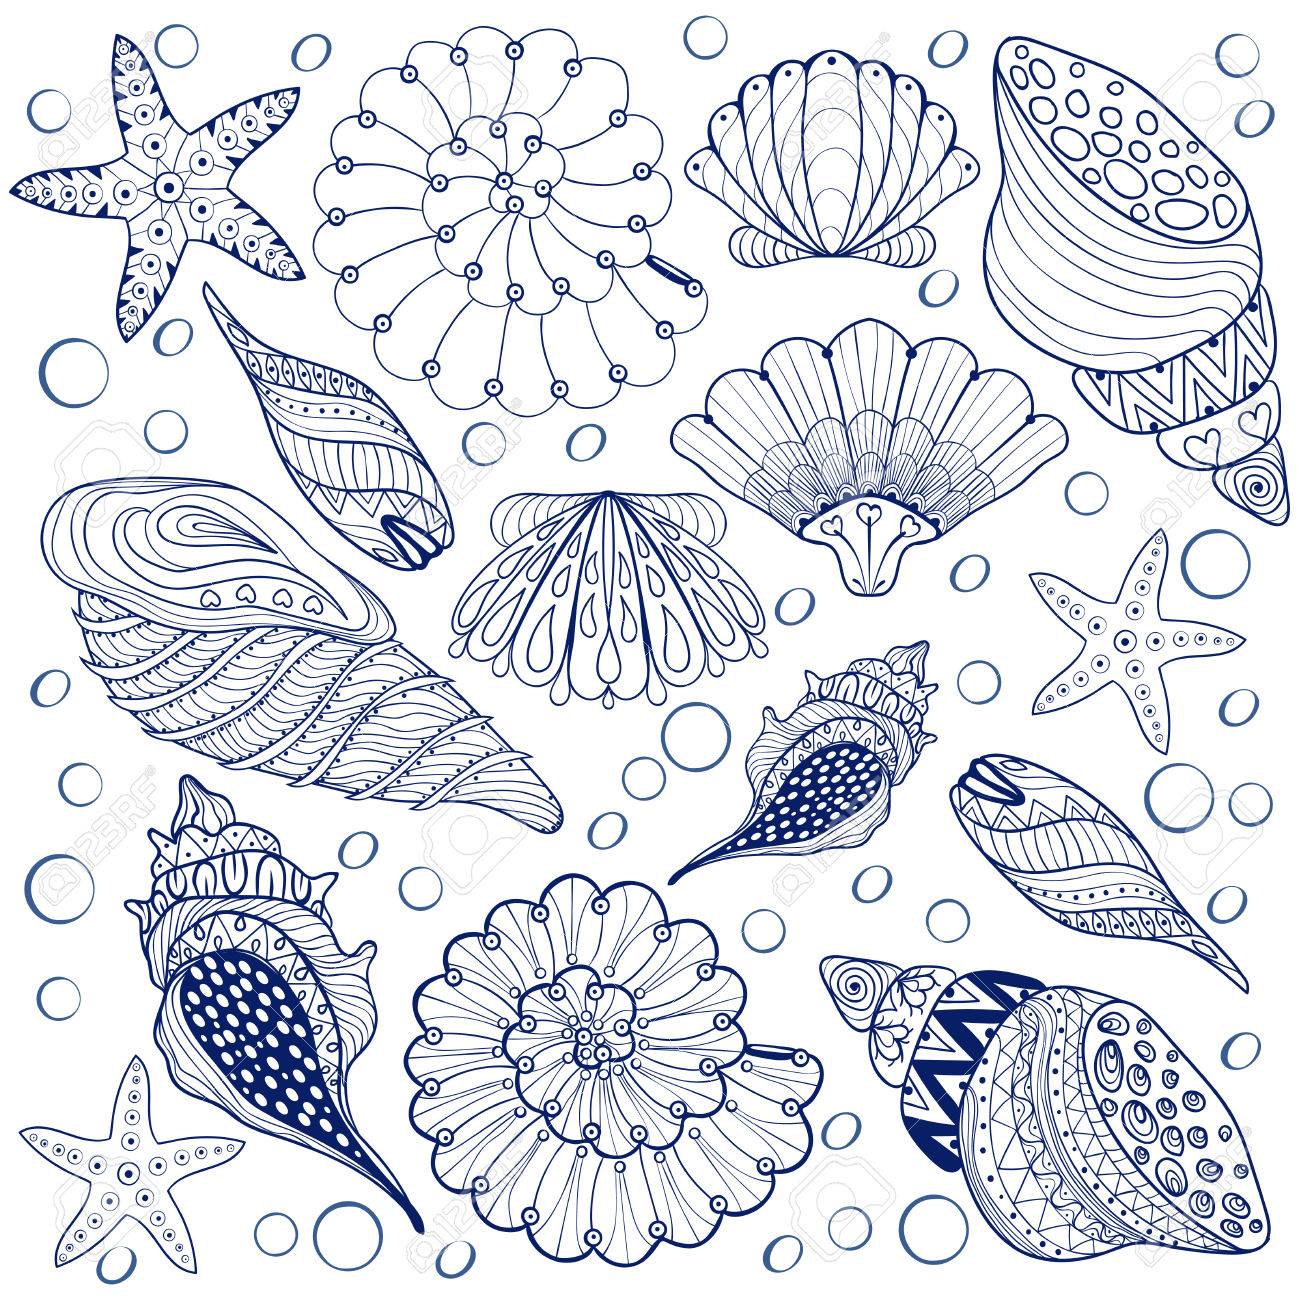 Vector set shells zentangle blue seashells for adult anti stress coloring pages patterned sea shell illustration for tattoos with high details hand drawn sketch artistically decorative henna print royalty free svg cliparts